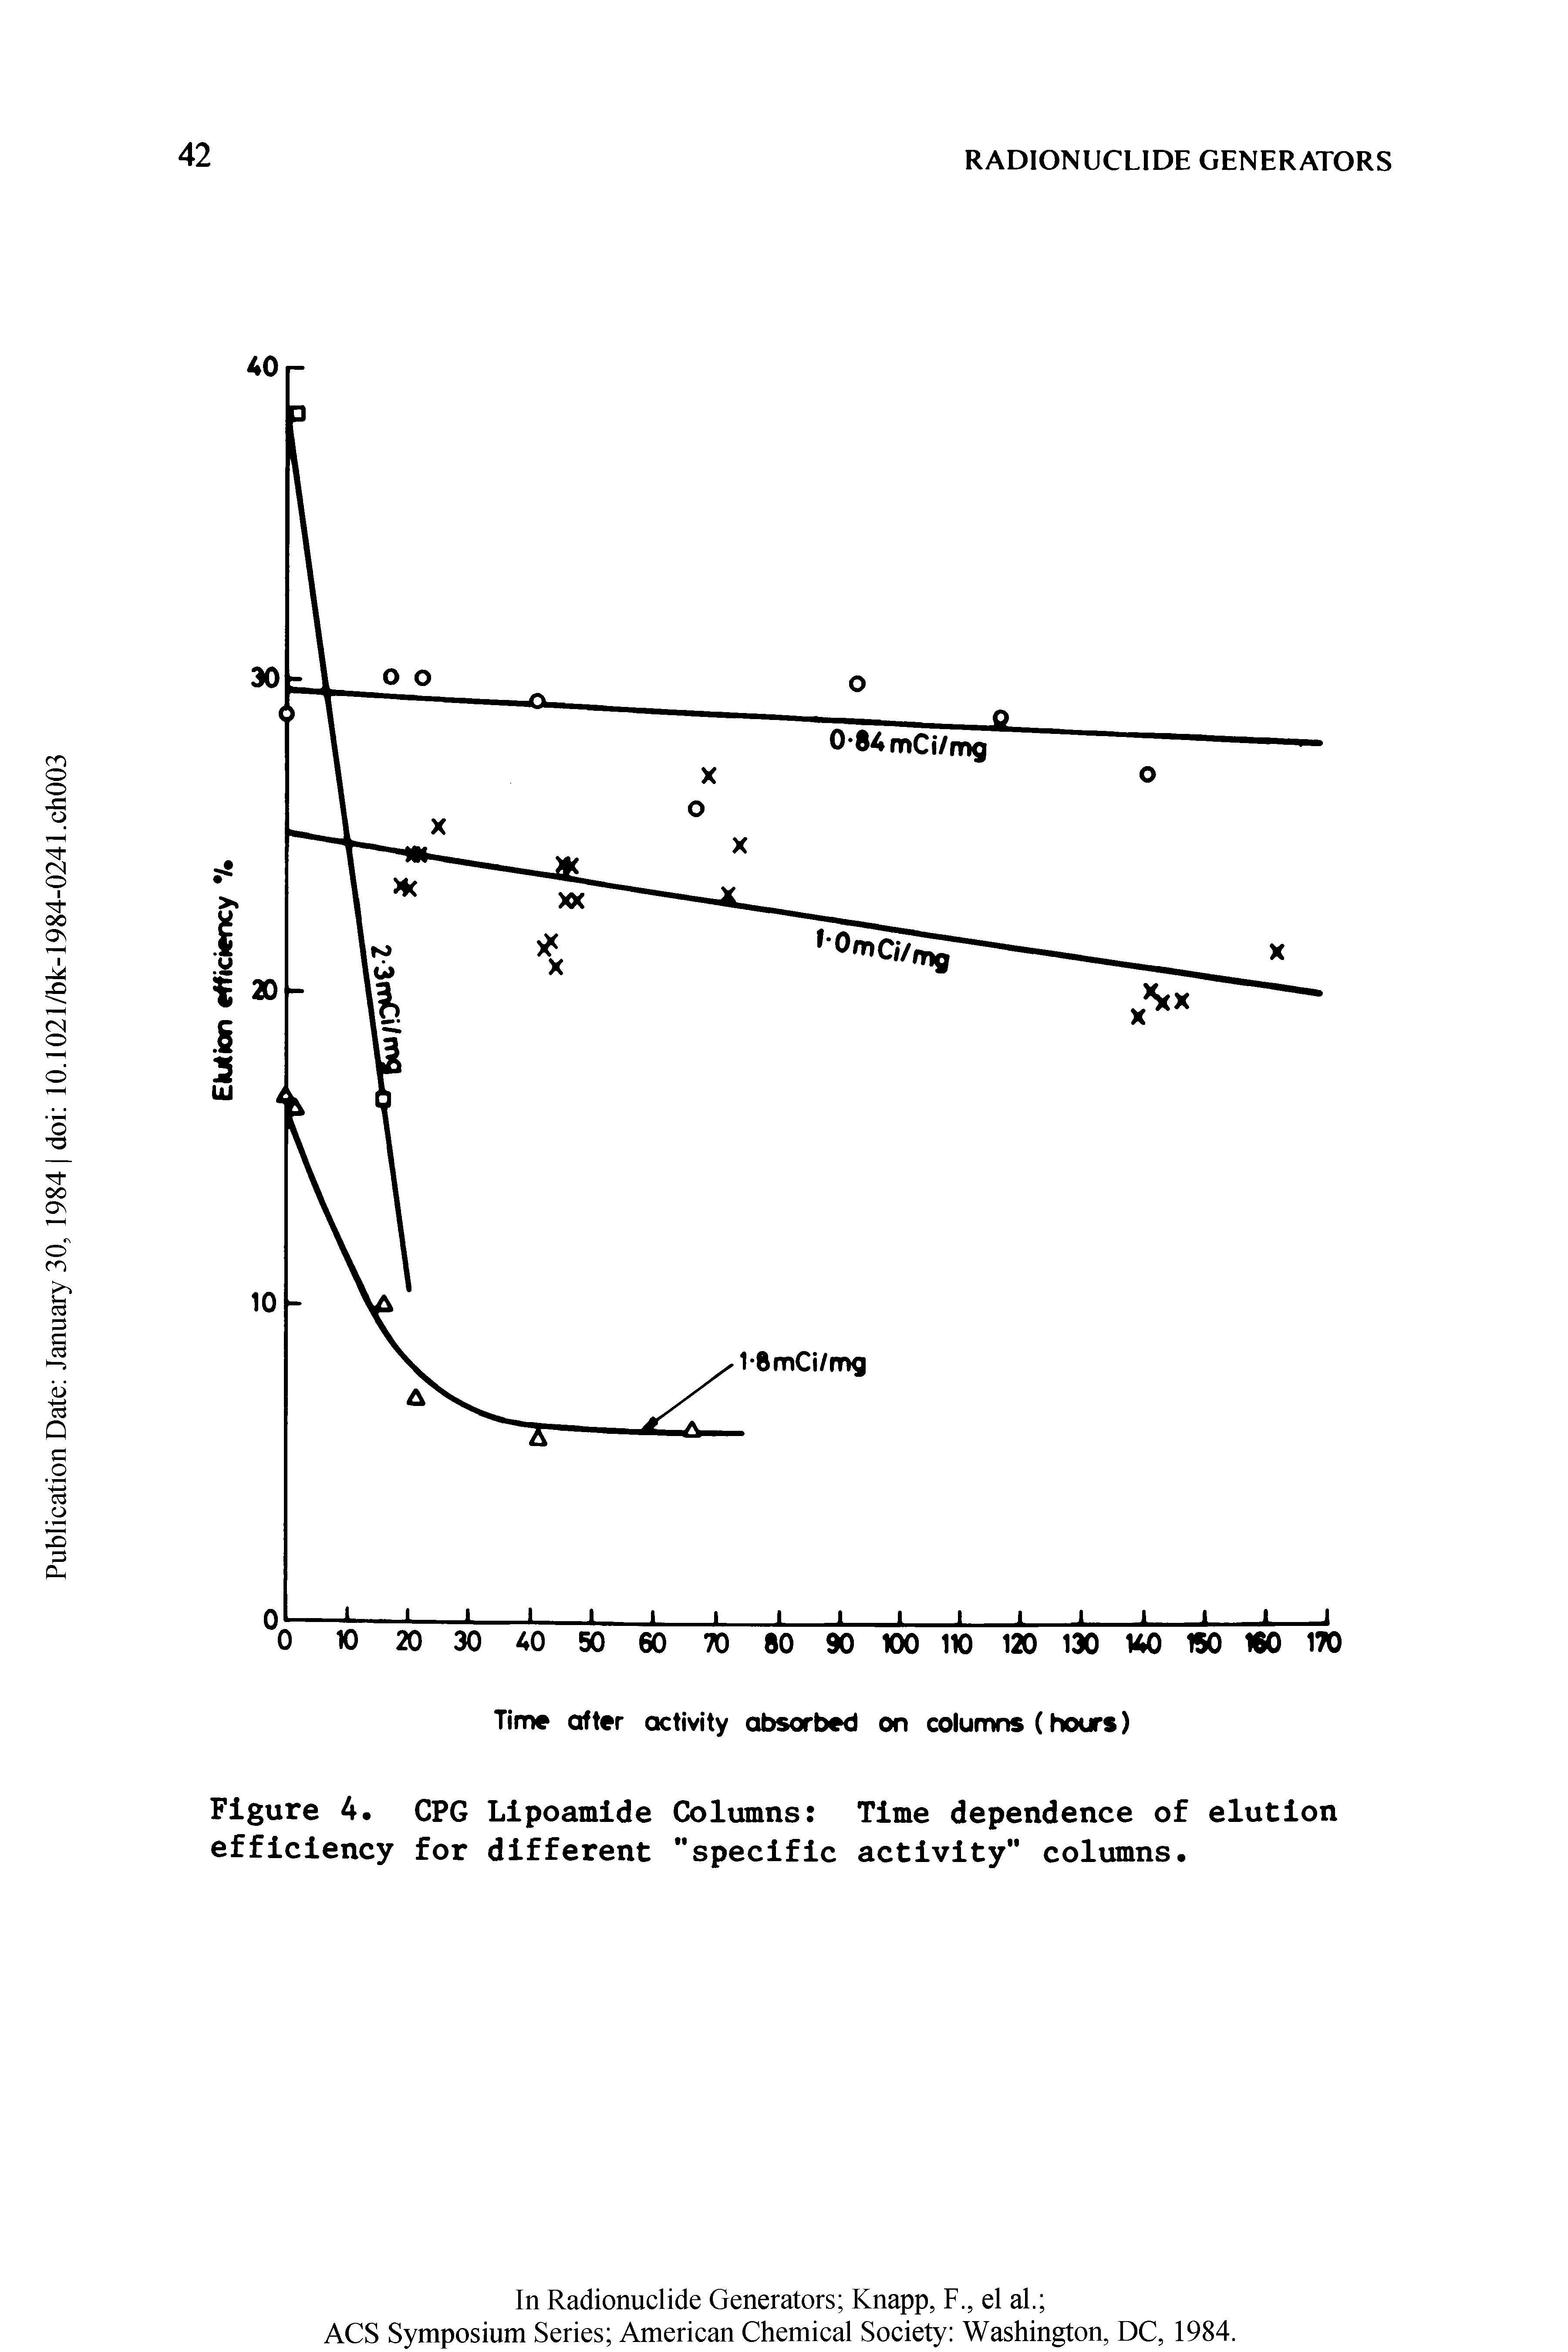 Figure 4. CPG Lipoamide Columns Time dependence of elution efficiency for different "specific activity" columns.